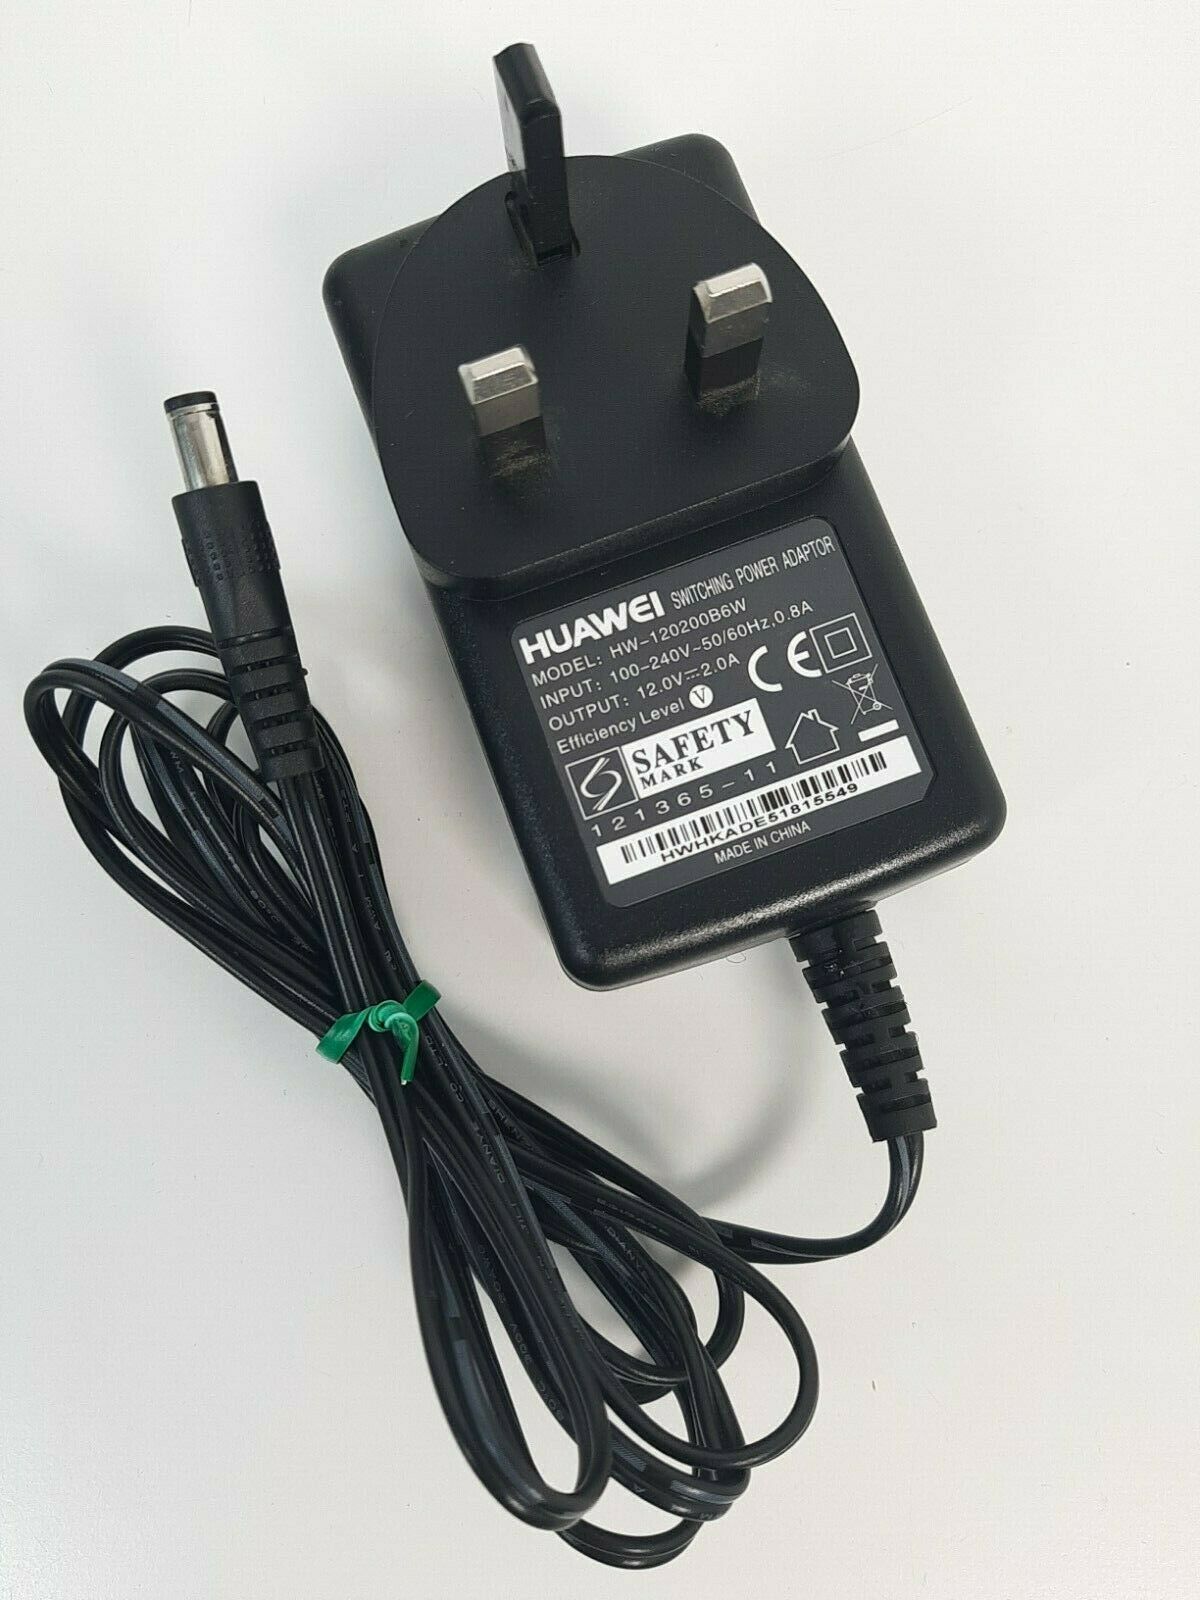 Genuine Huawei 12V 2A HW-120200B6W Switching Power Supply Mains Adapter UK Plug Features: Powered Cable Length: 2 m - Click Image to Close